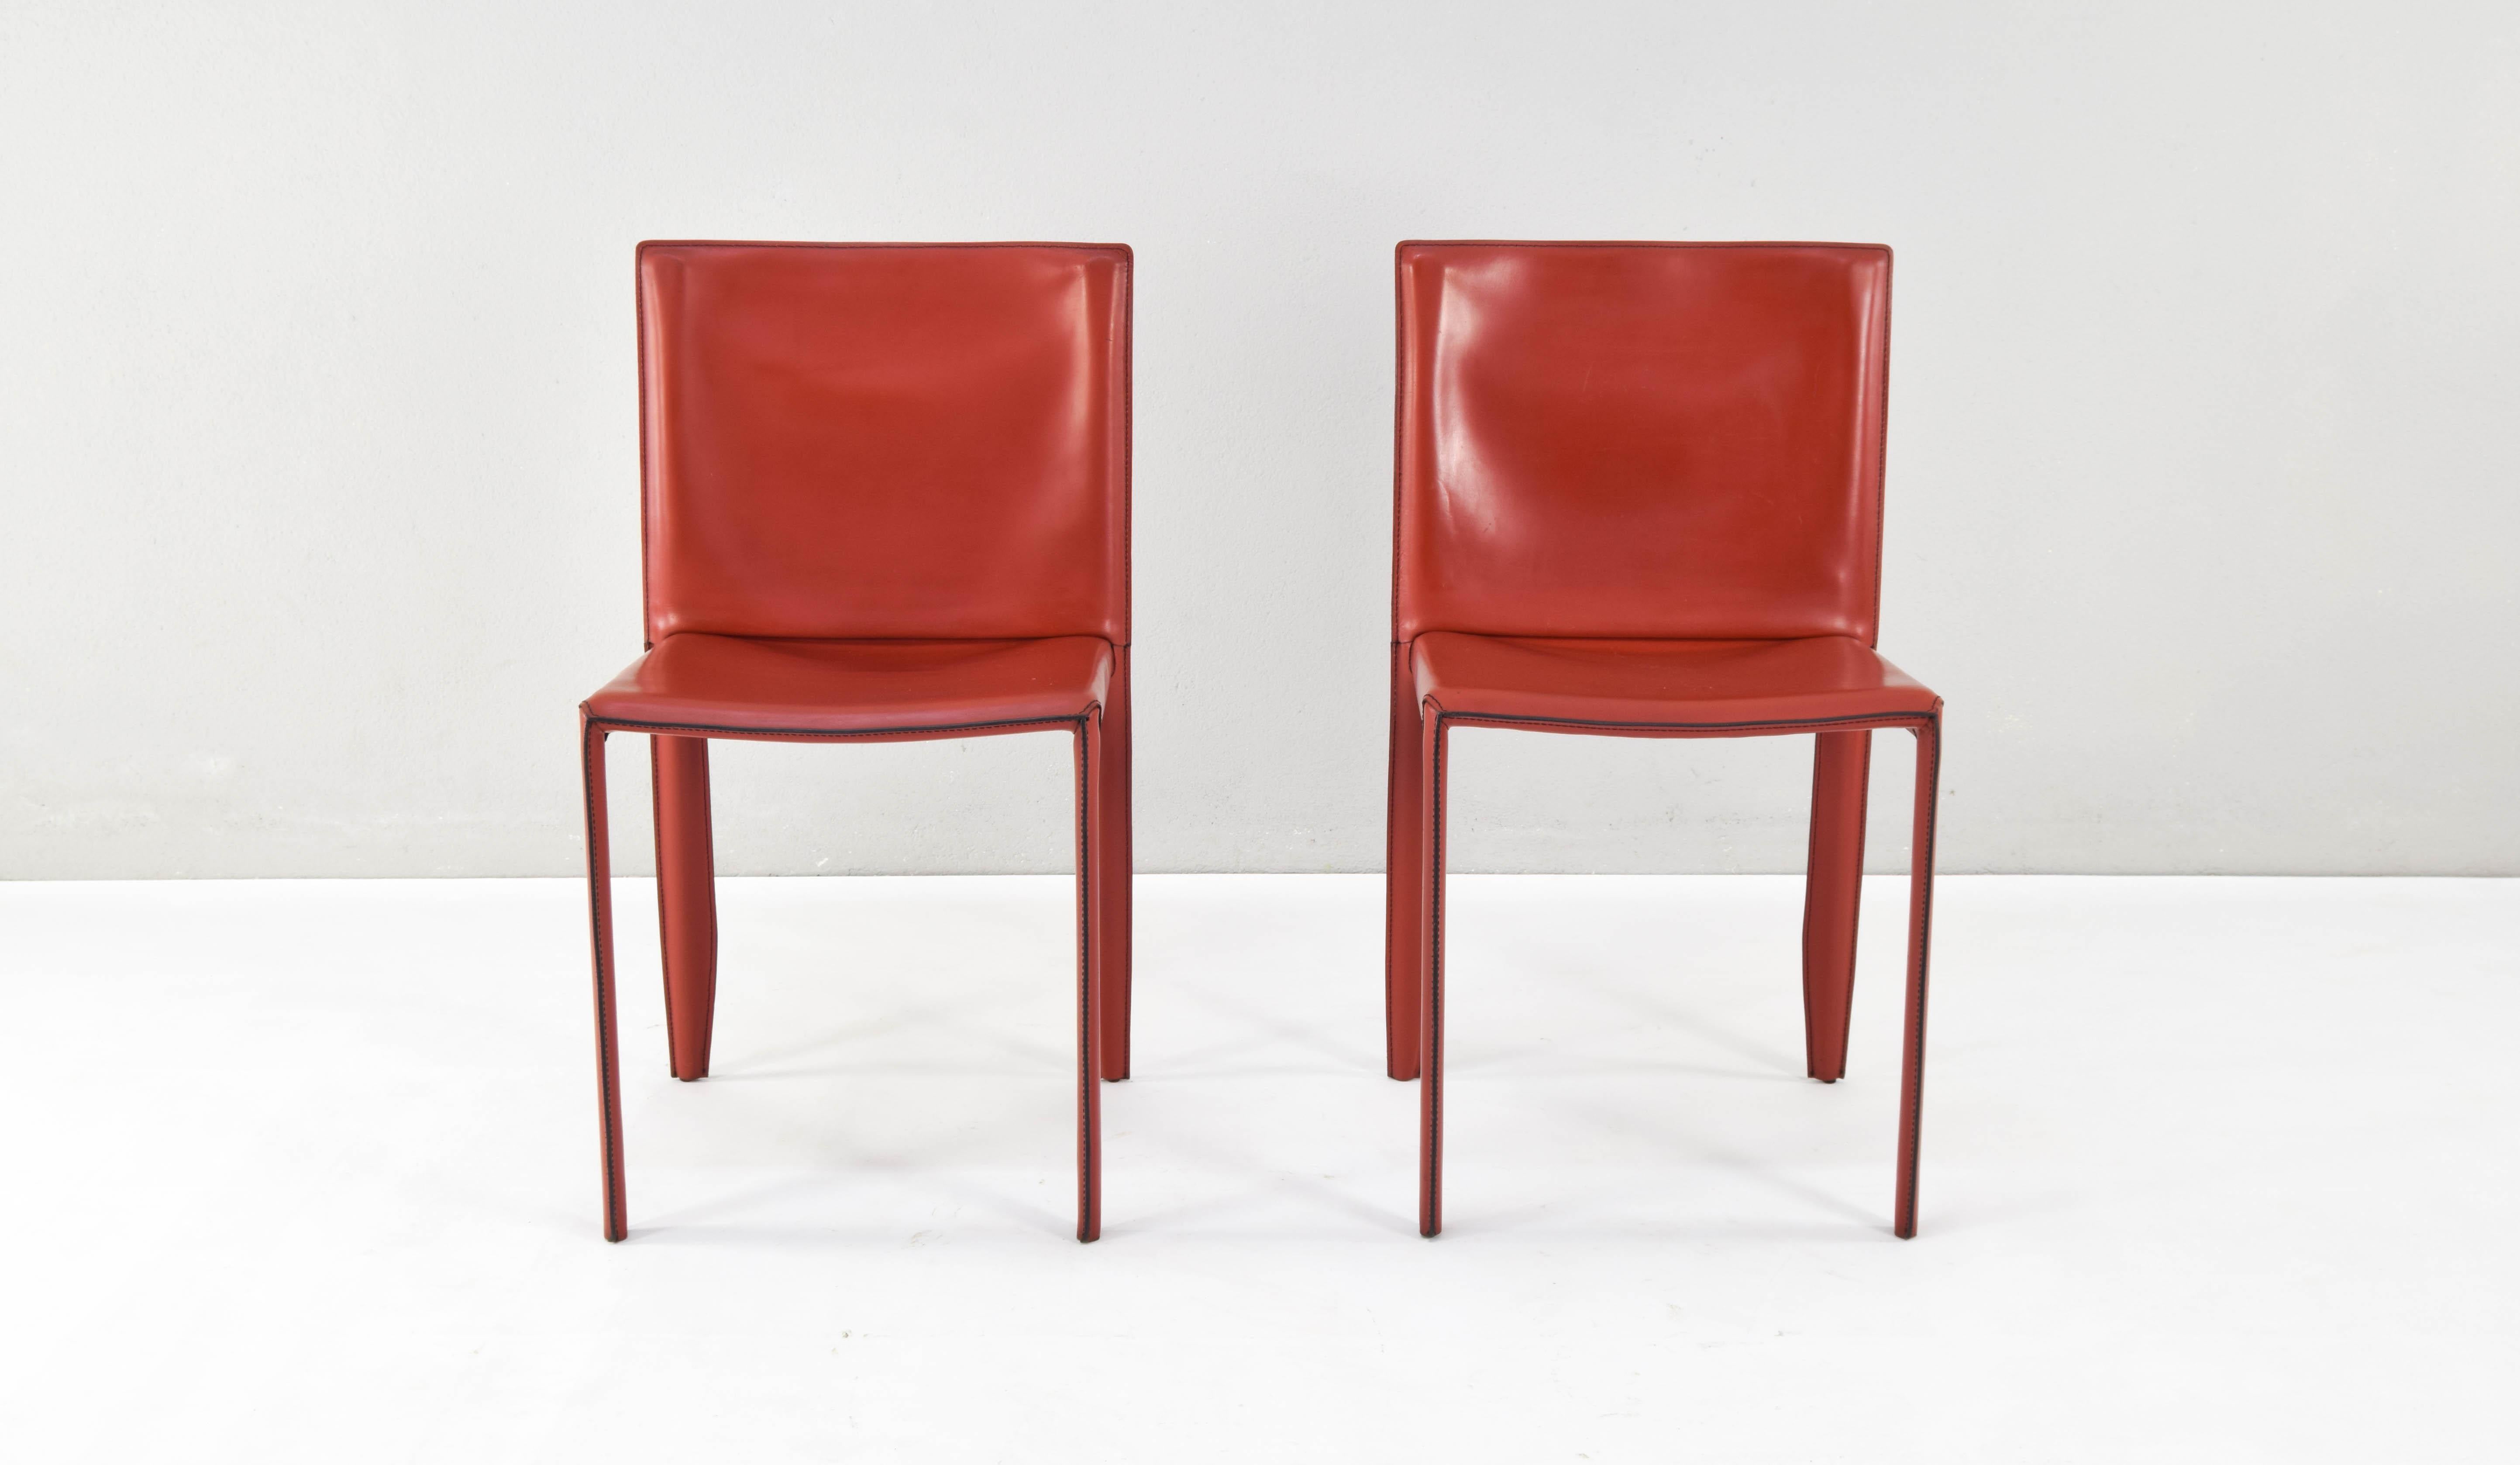 Piuma model chairs designed by Studio Kronos for Cattelan Italia.
This pair of first edition chairs are characterized by an elegant V-shaped decoration sewn on the back, which differentiates them from the current ones. Two decades later the Piuma